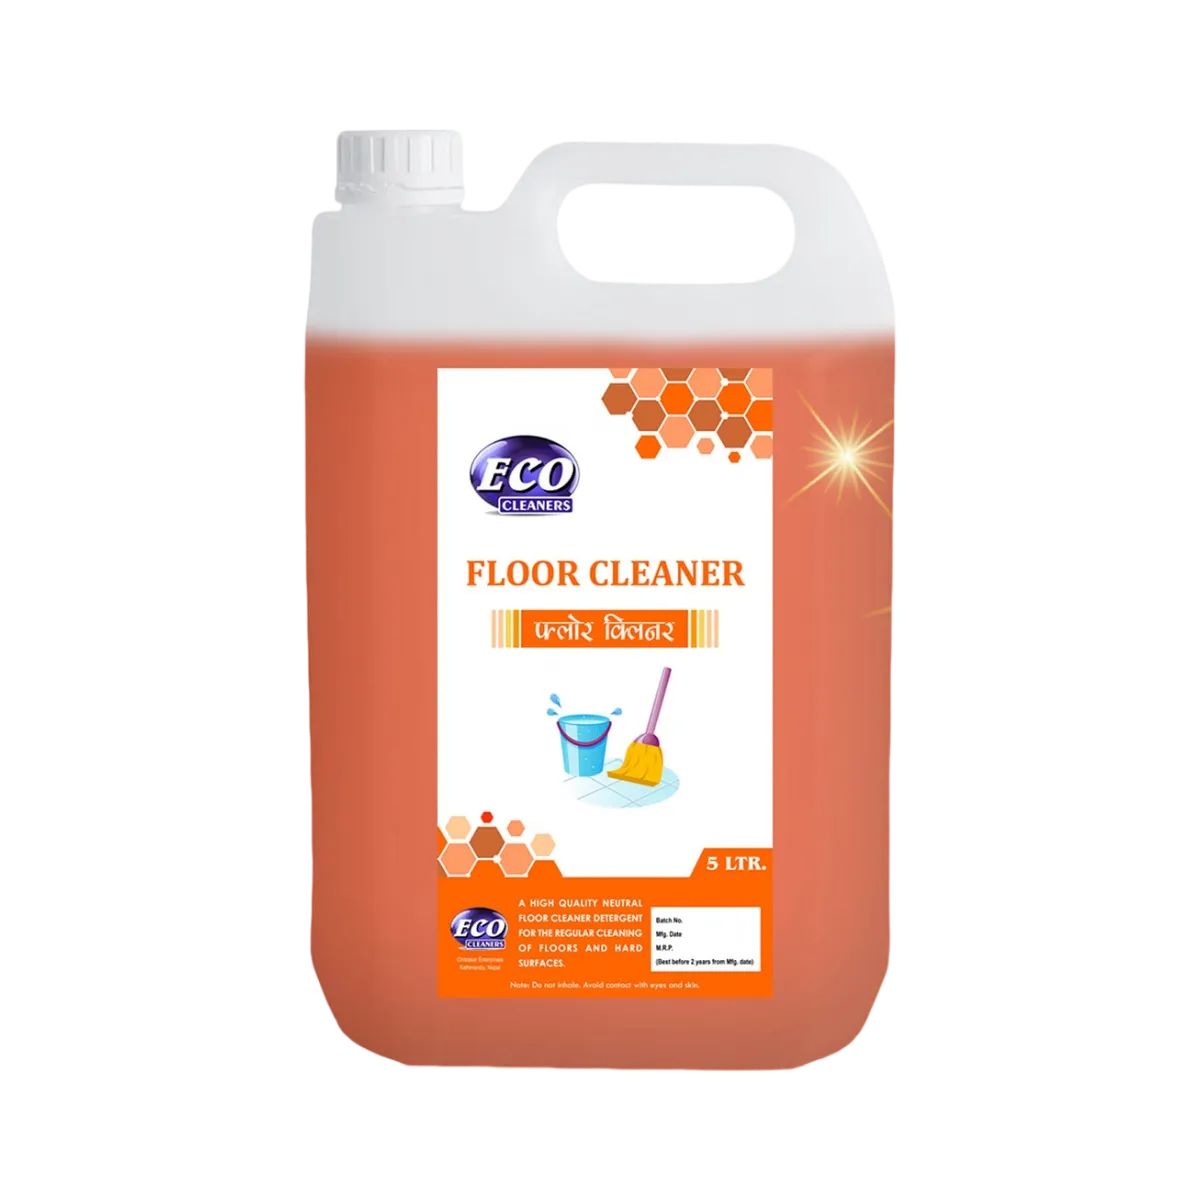 Eco Cleaners Floor Cleaner 5 Ltr